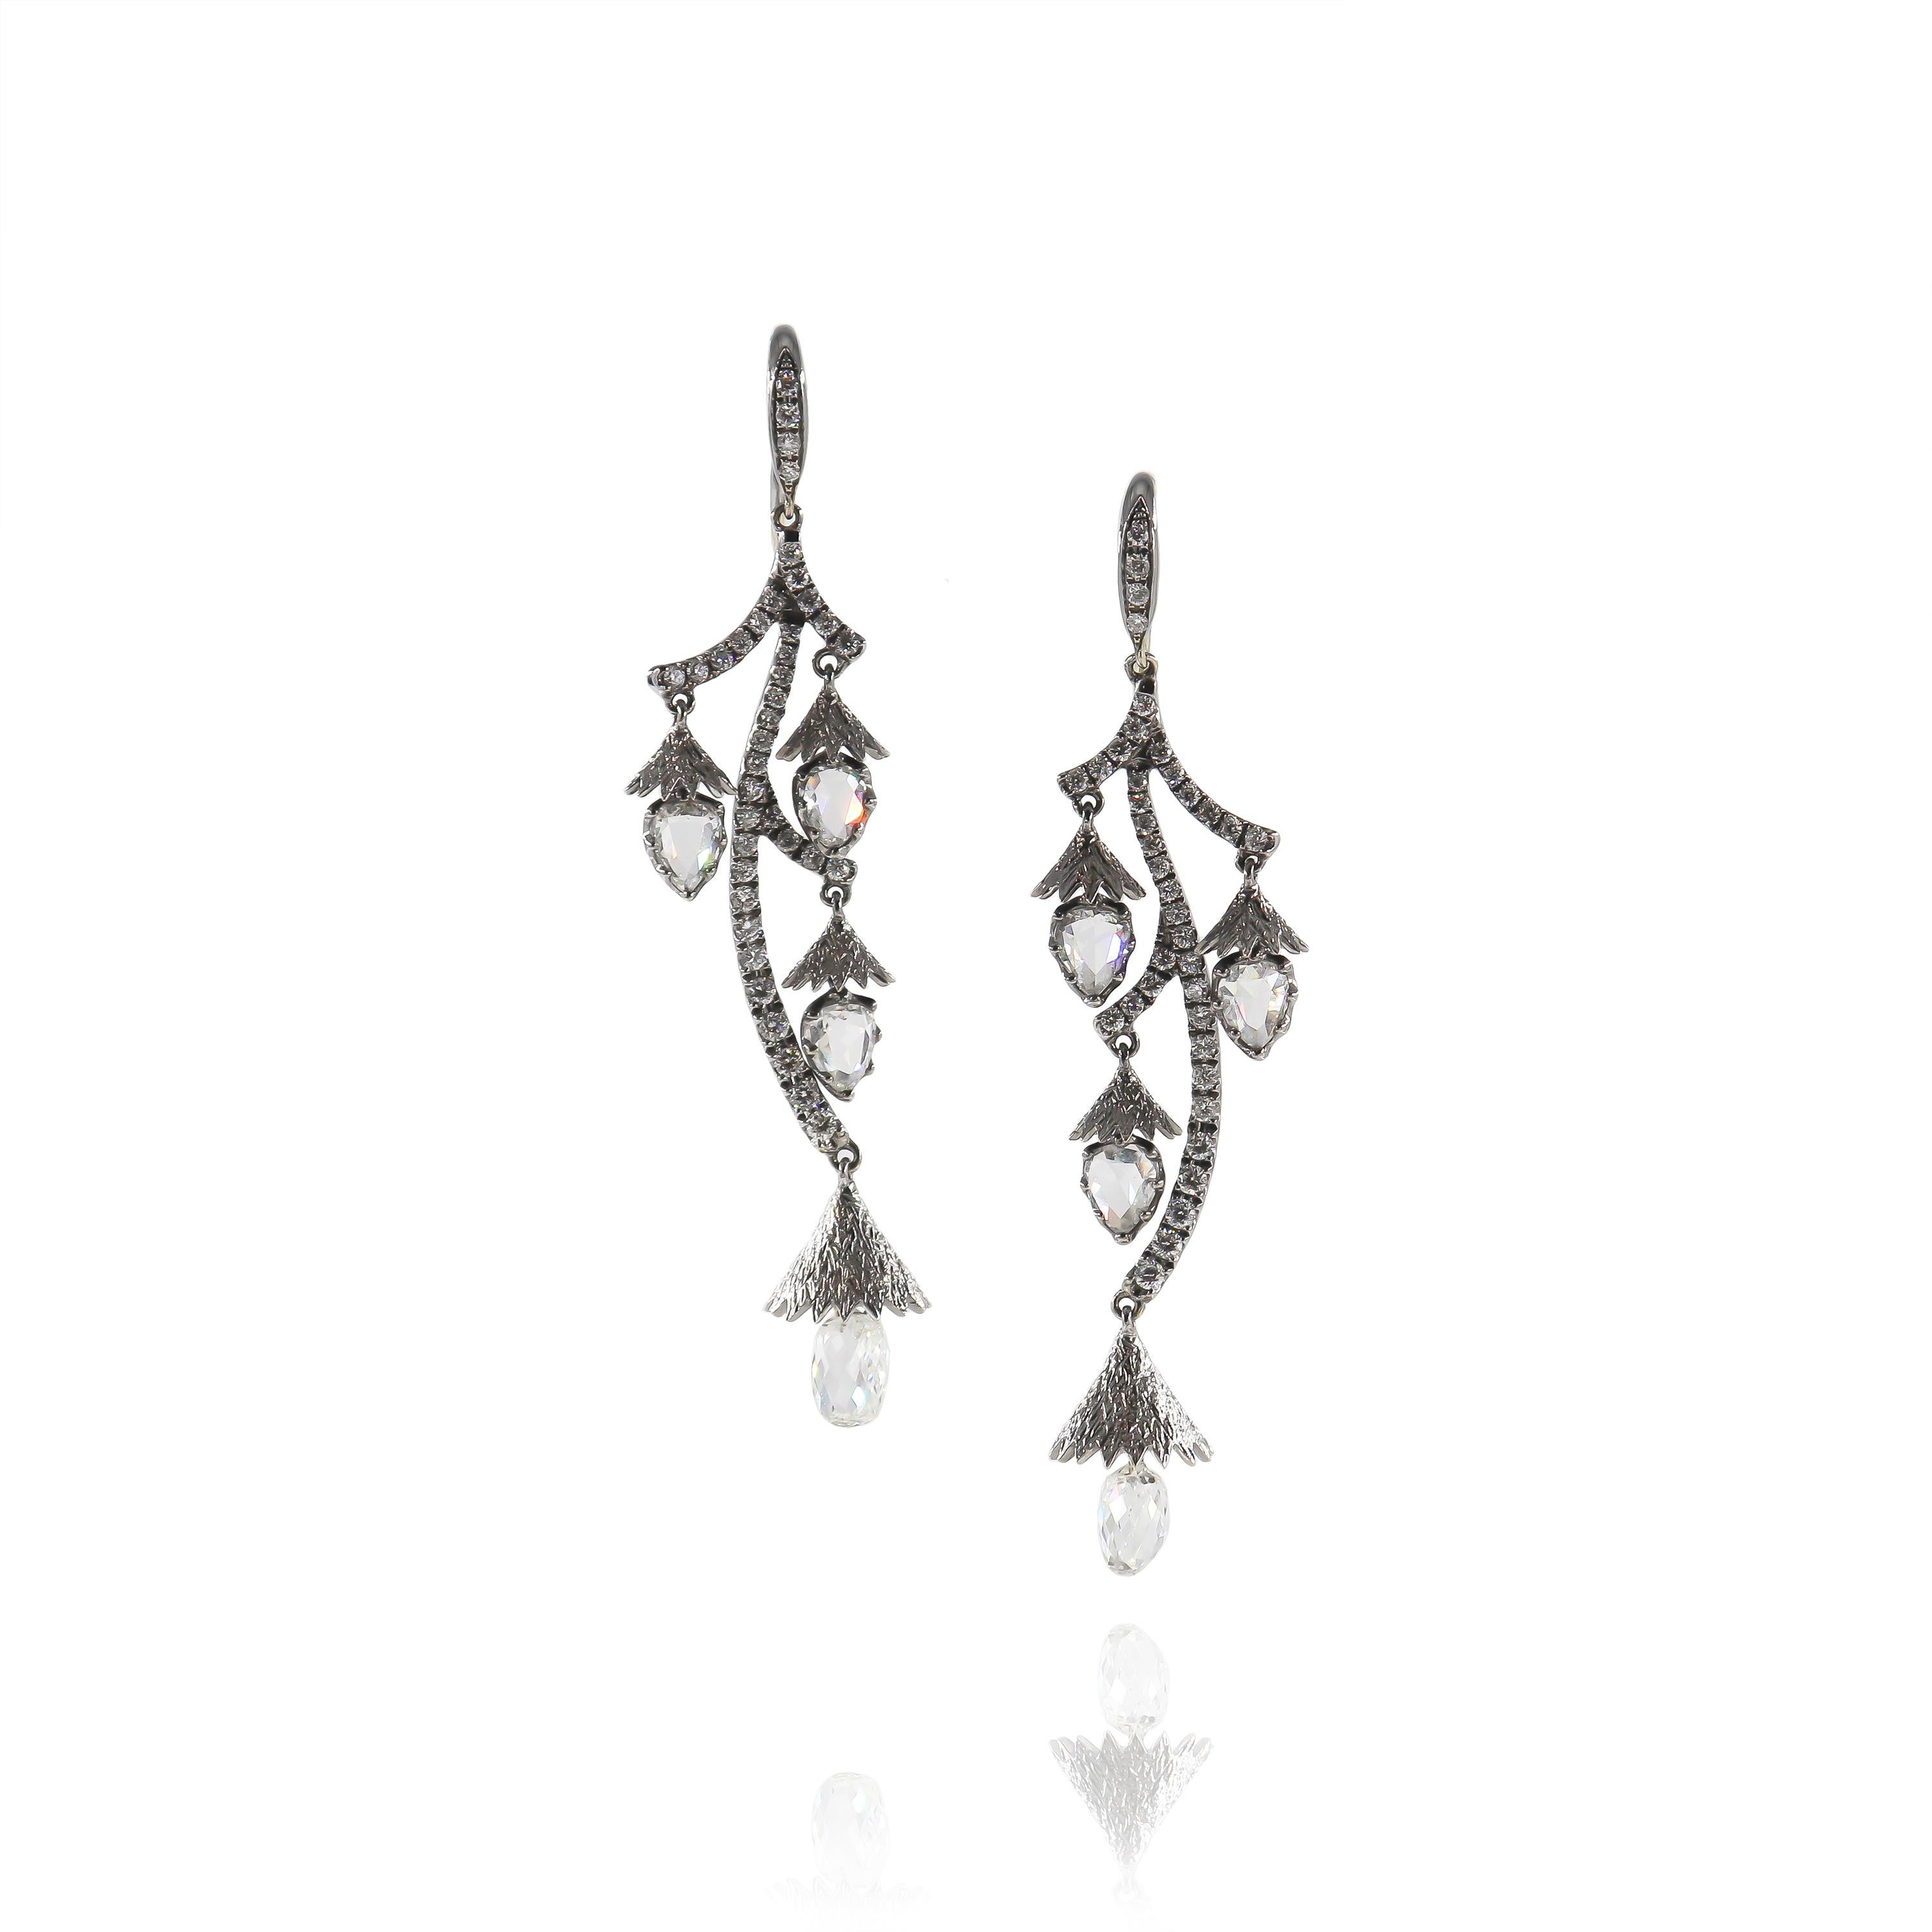 This exquisite pair of drop earrings new from the J. Birnbach workshop won't be around for long... Featuring assorted pavé = 1.88 carat total weight, six, rose-cut pear shape diamonds and a scintillating, matched pair of briolettes = approximately 5